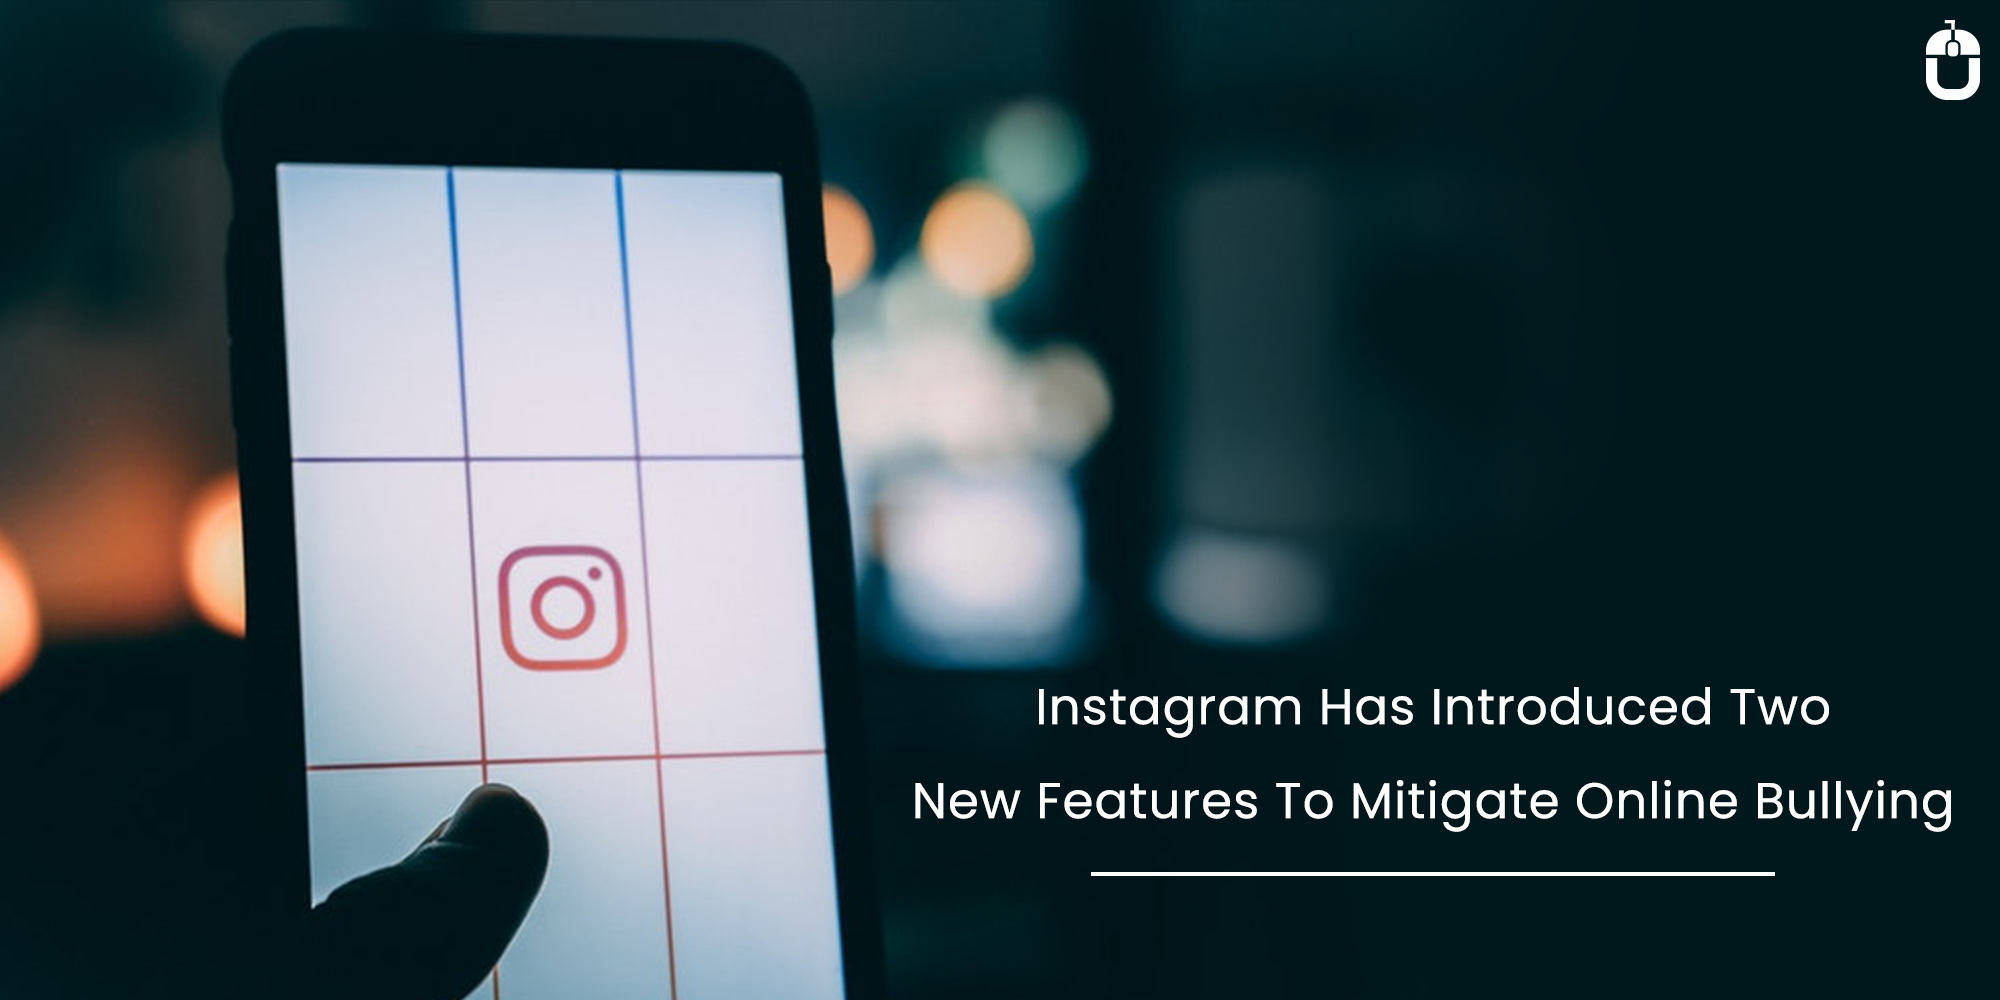 Instagram Has Introduced Two New Features To Mitigate Online Bullying